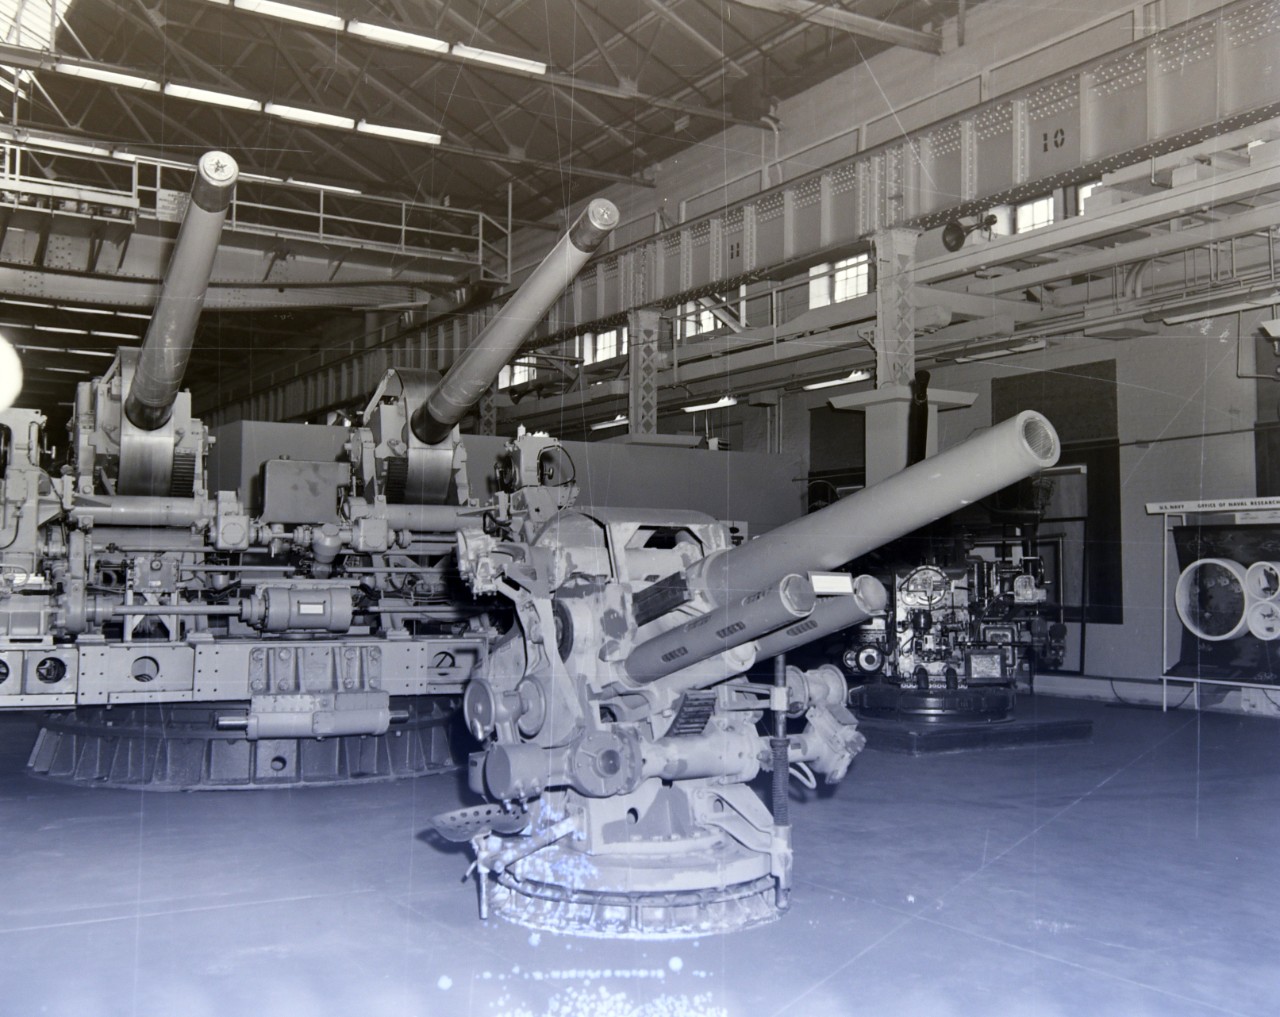 NMUSN-1370: Weapons Display area, 1970s. 5” inch submarine gun along with the 5” .38 twin caliber gun on display. Original is a negative. National Museum of the U.S. Navy Photograph Collection